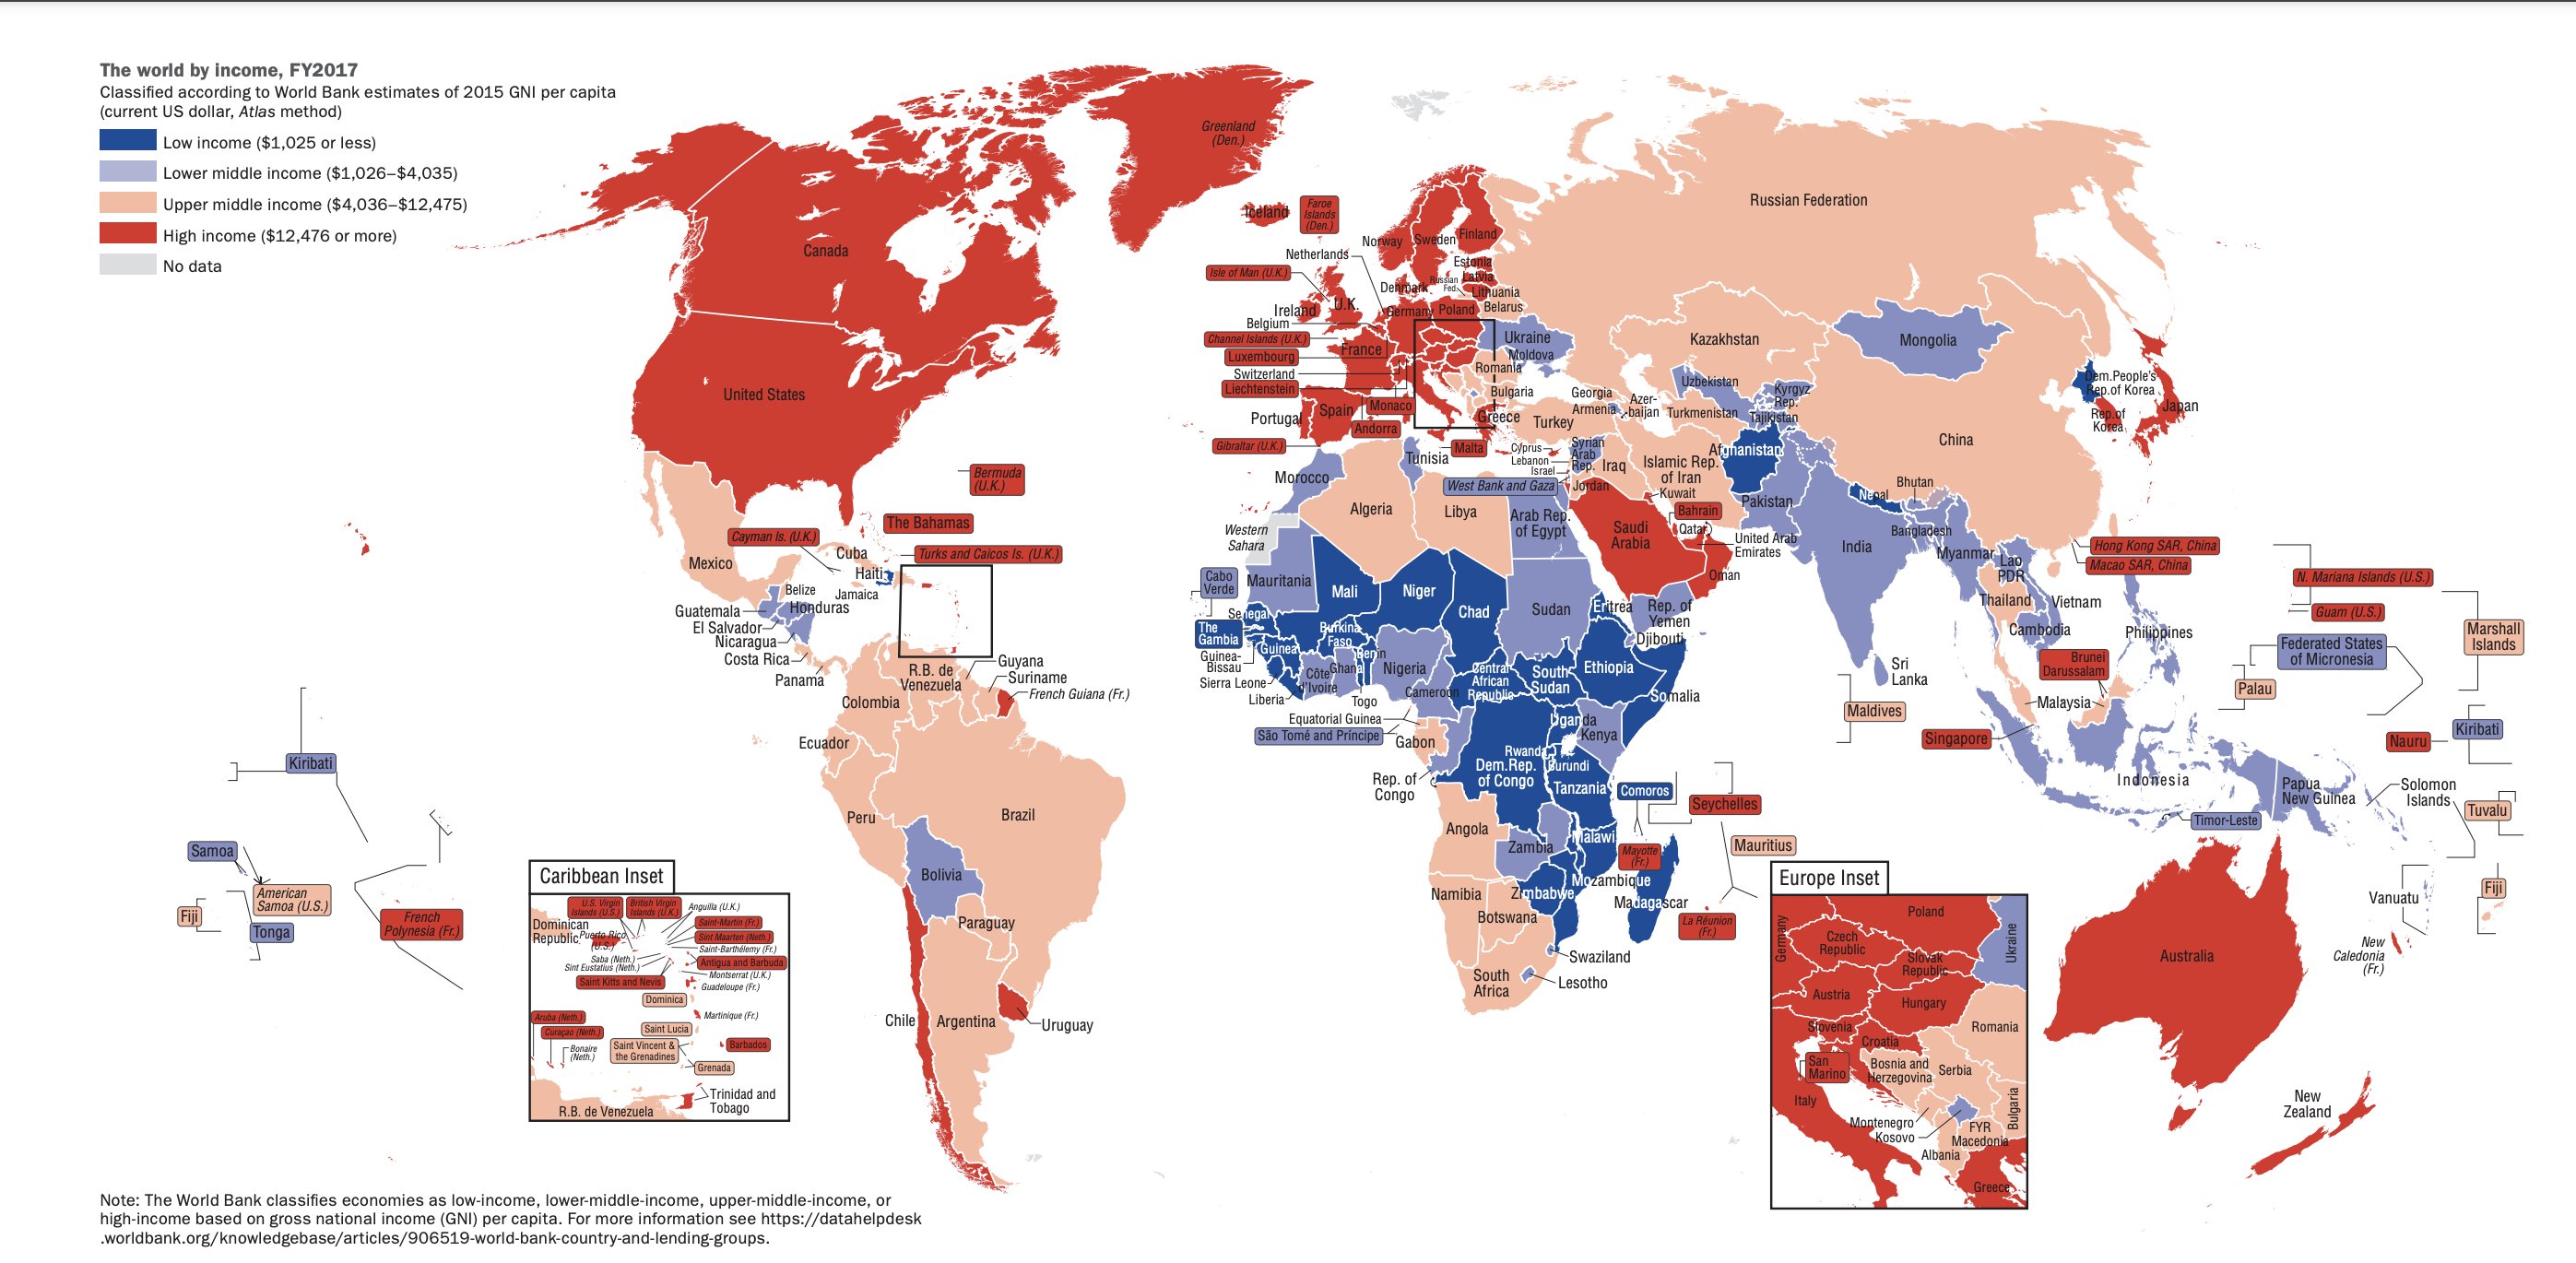 Income Categories for Countries as Defined by the World Bank in 2017. Low income is depicted by a dark blue, lower middle is depicted by a lighter blue, upper middle is depicted by a peach color, and the high income are depicted in red.